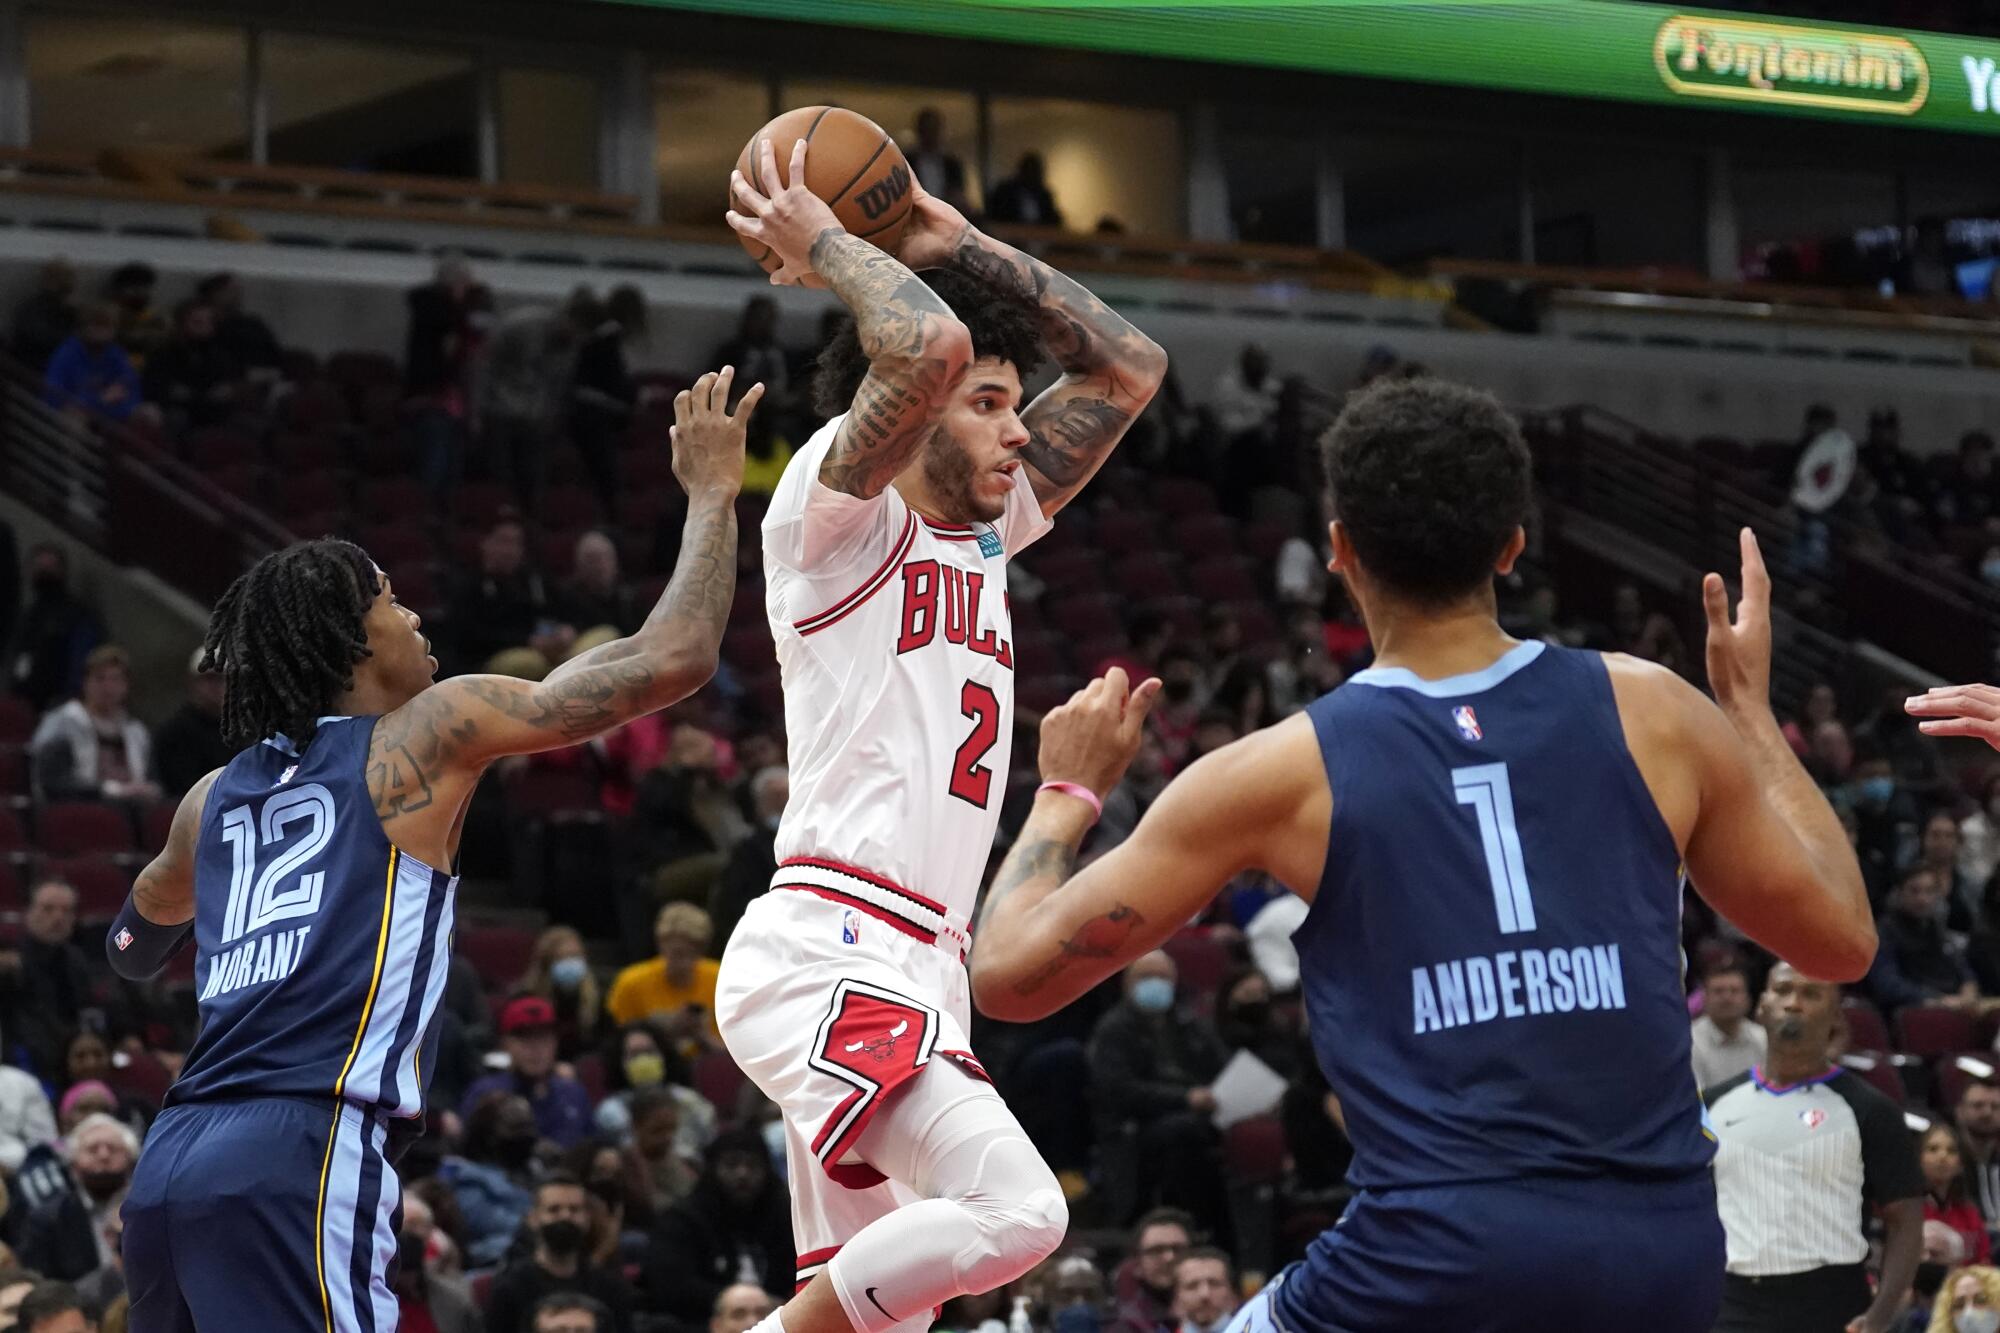 The Bulls' Lonzo Ball makes a pass while under pressure from Grizzlies guard Ja Morant, left, and forward Kyle Anderson.